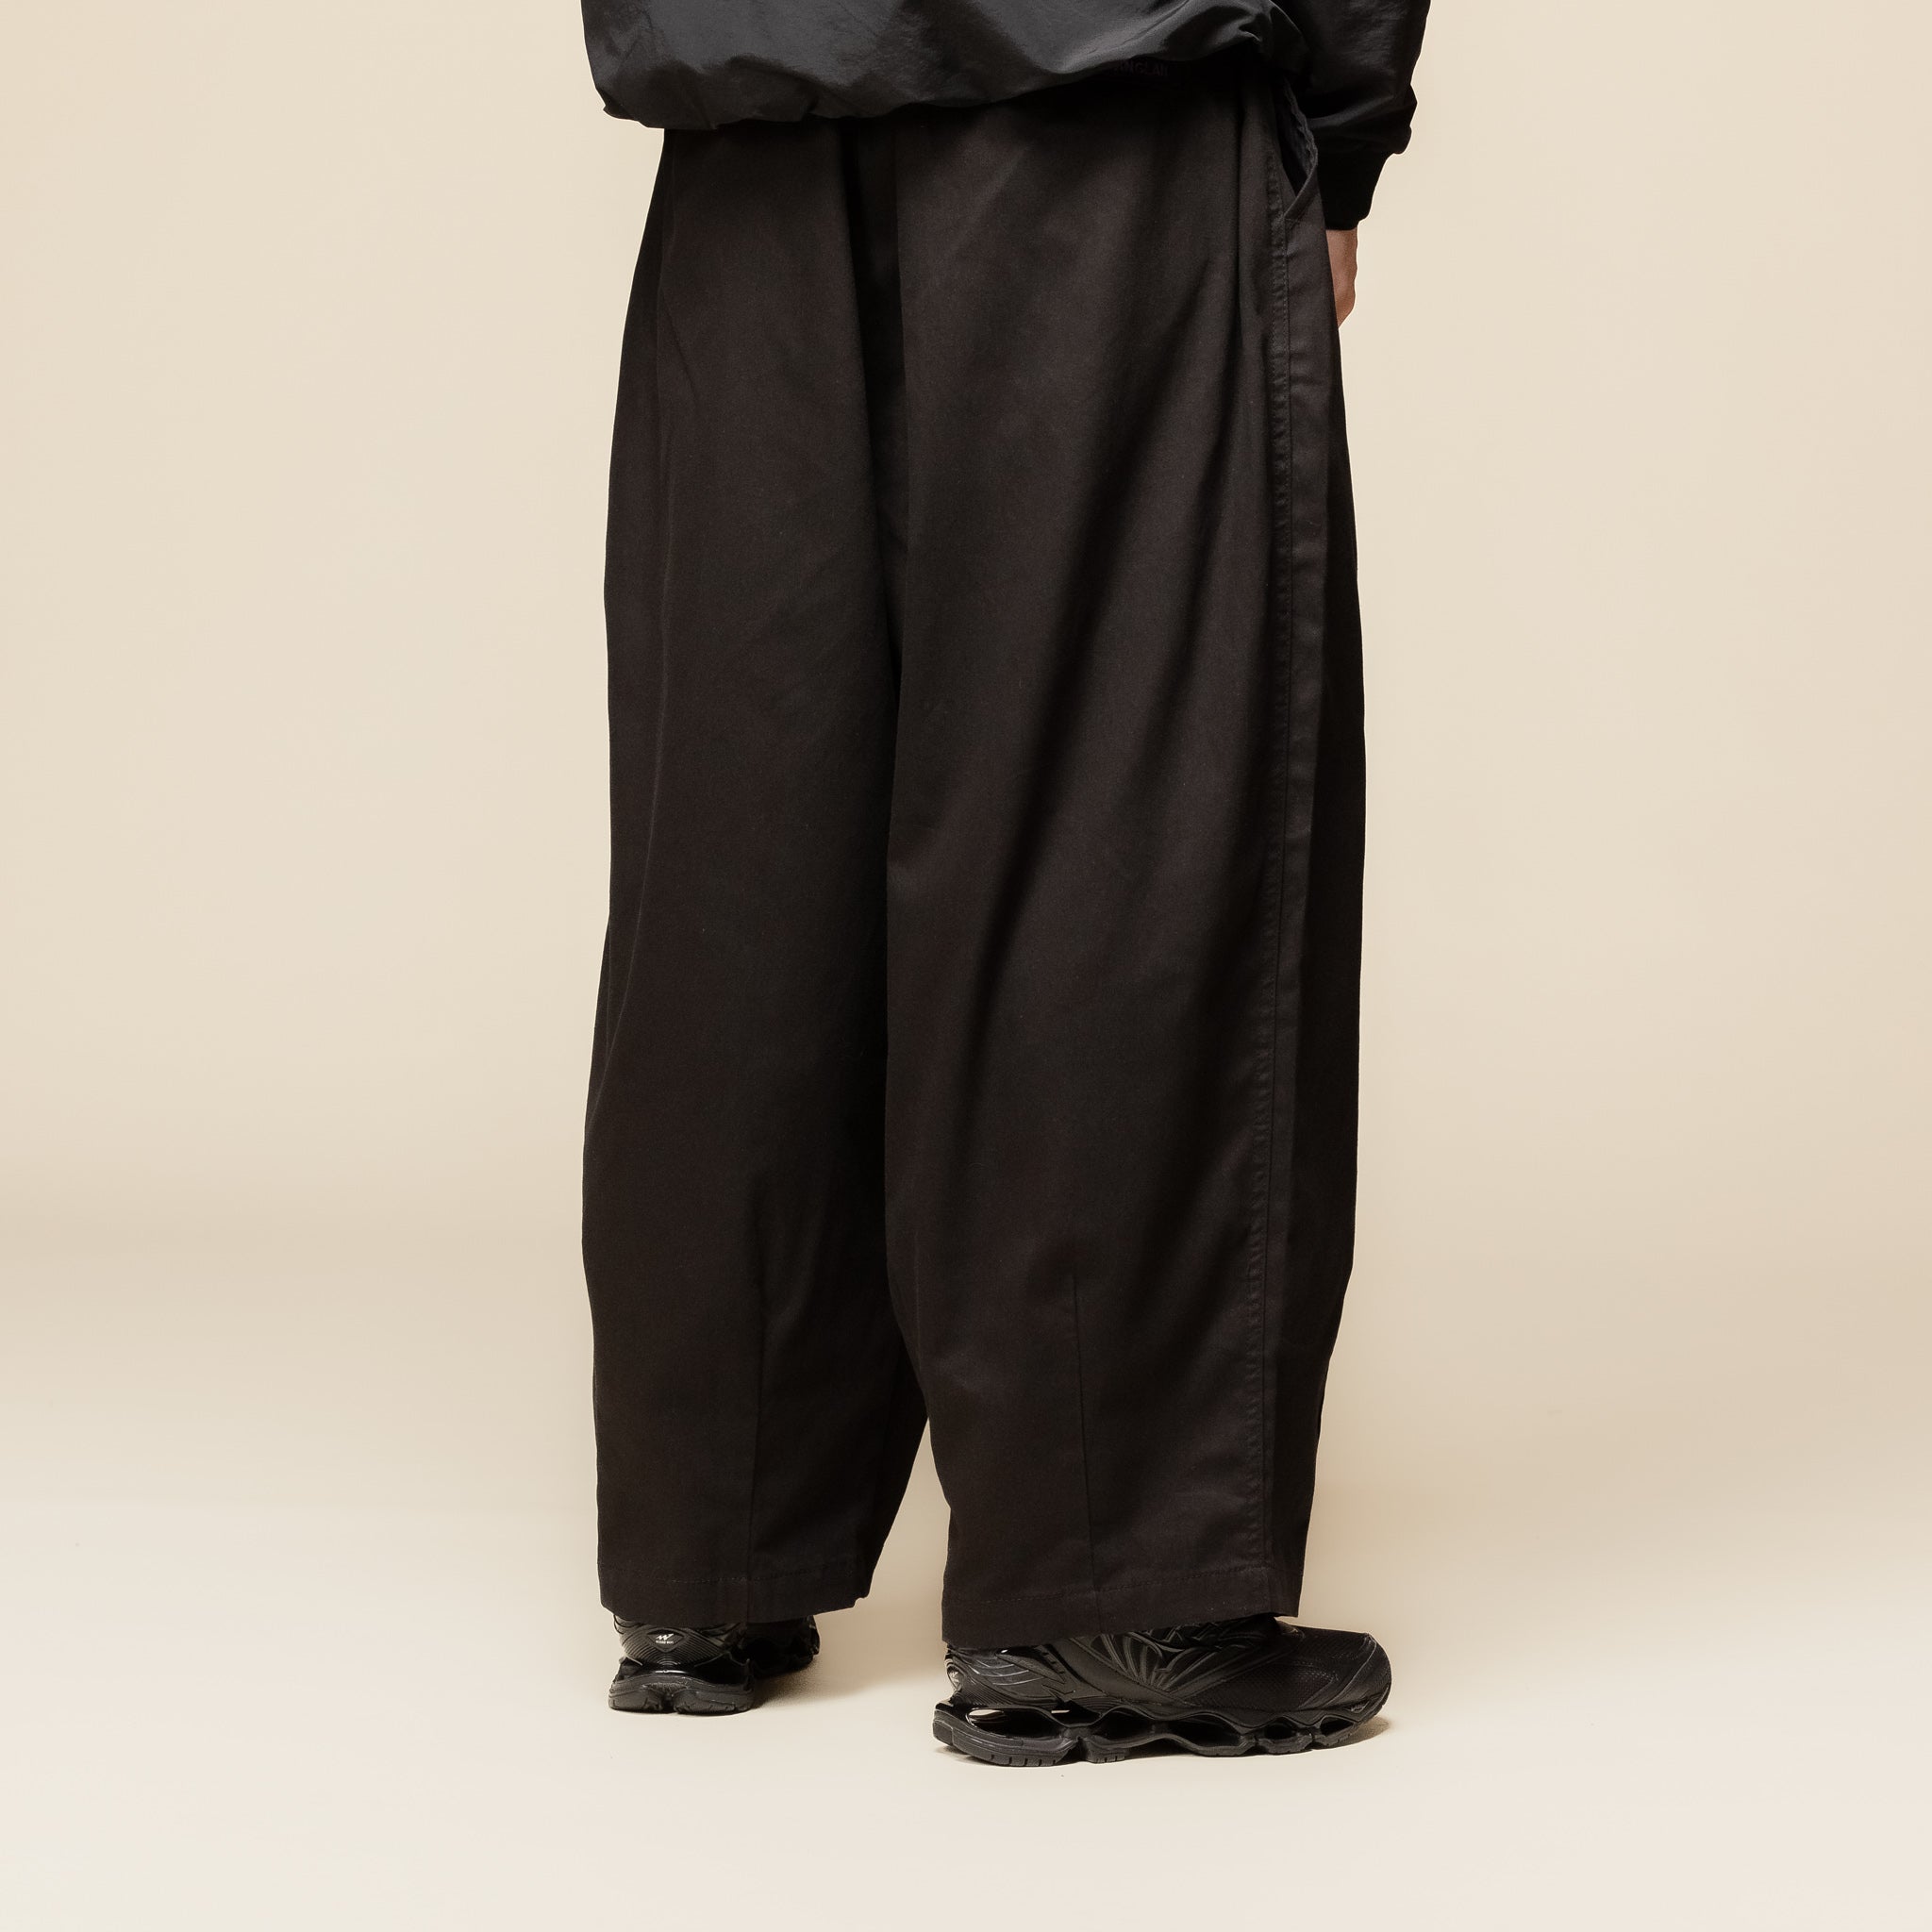 Anglan - Cotton Twill Belted Balloon Pants - Black "Anglan pants" "Anglan stockists" "Anglan website"